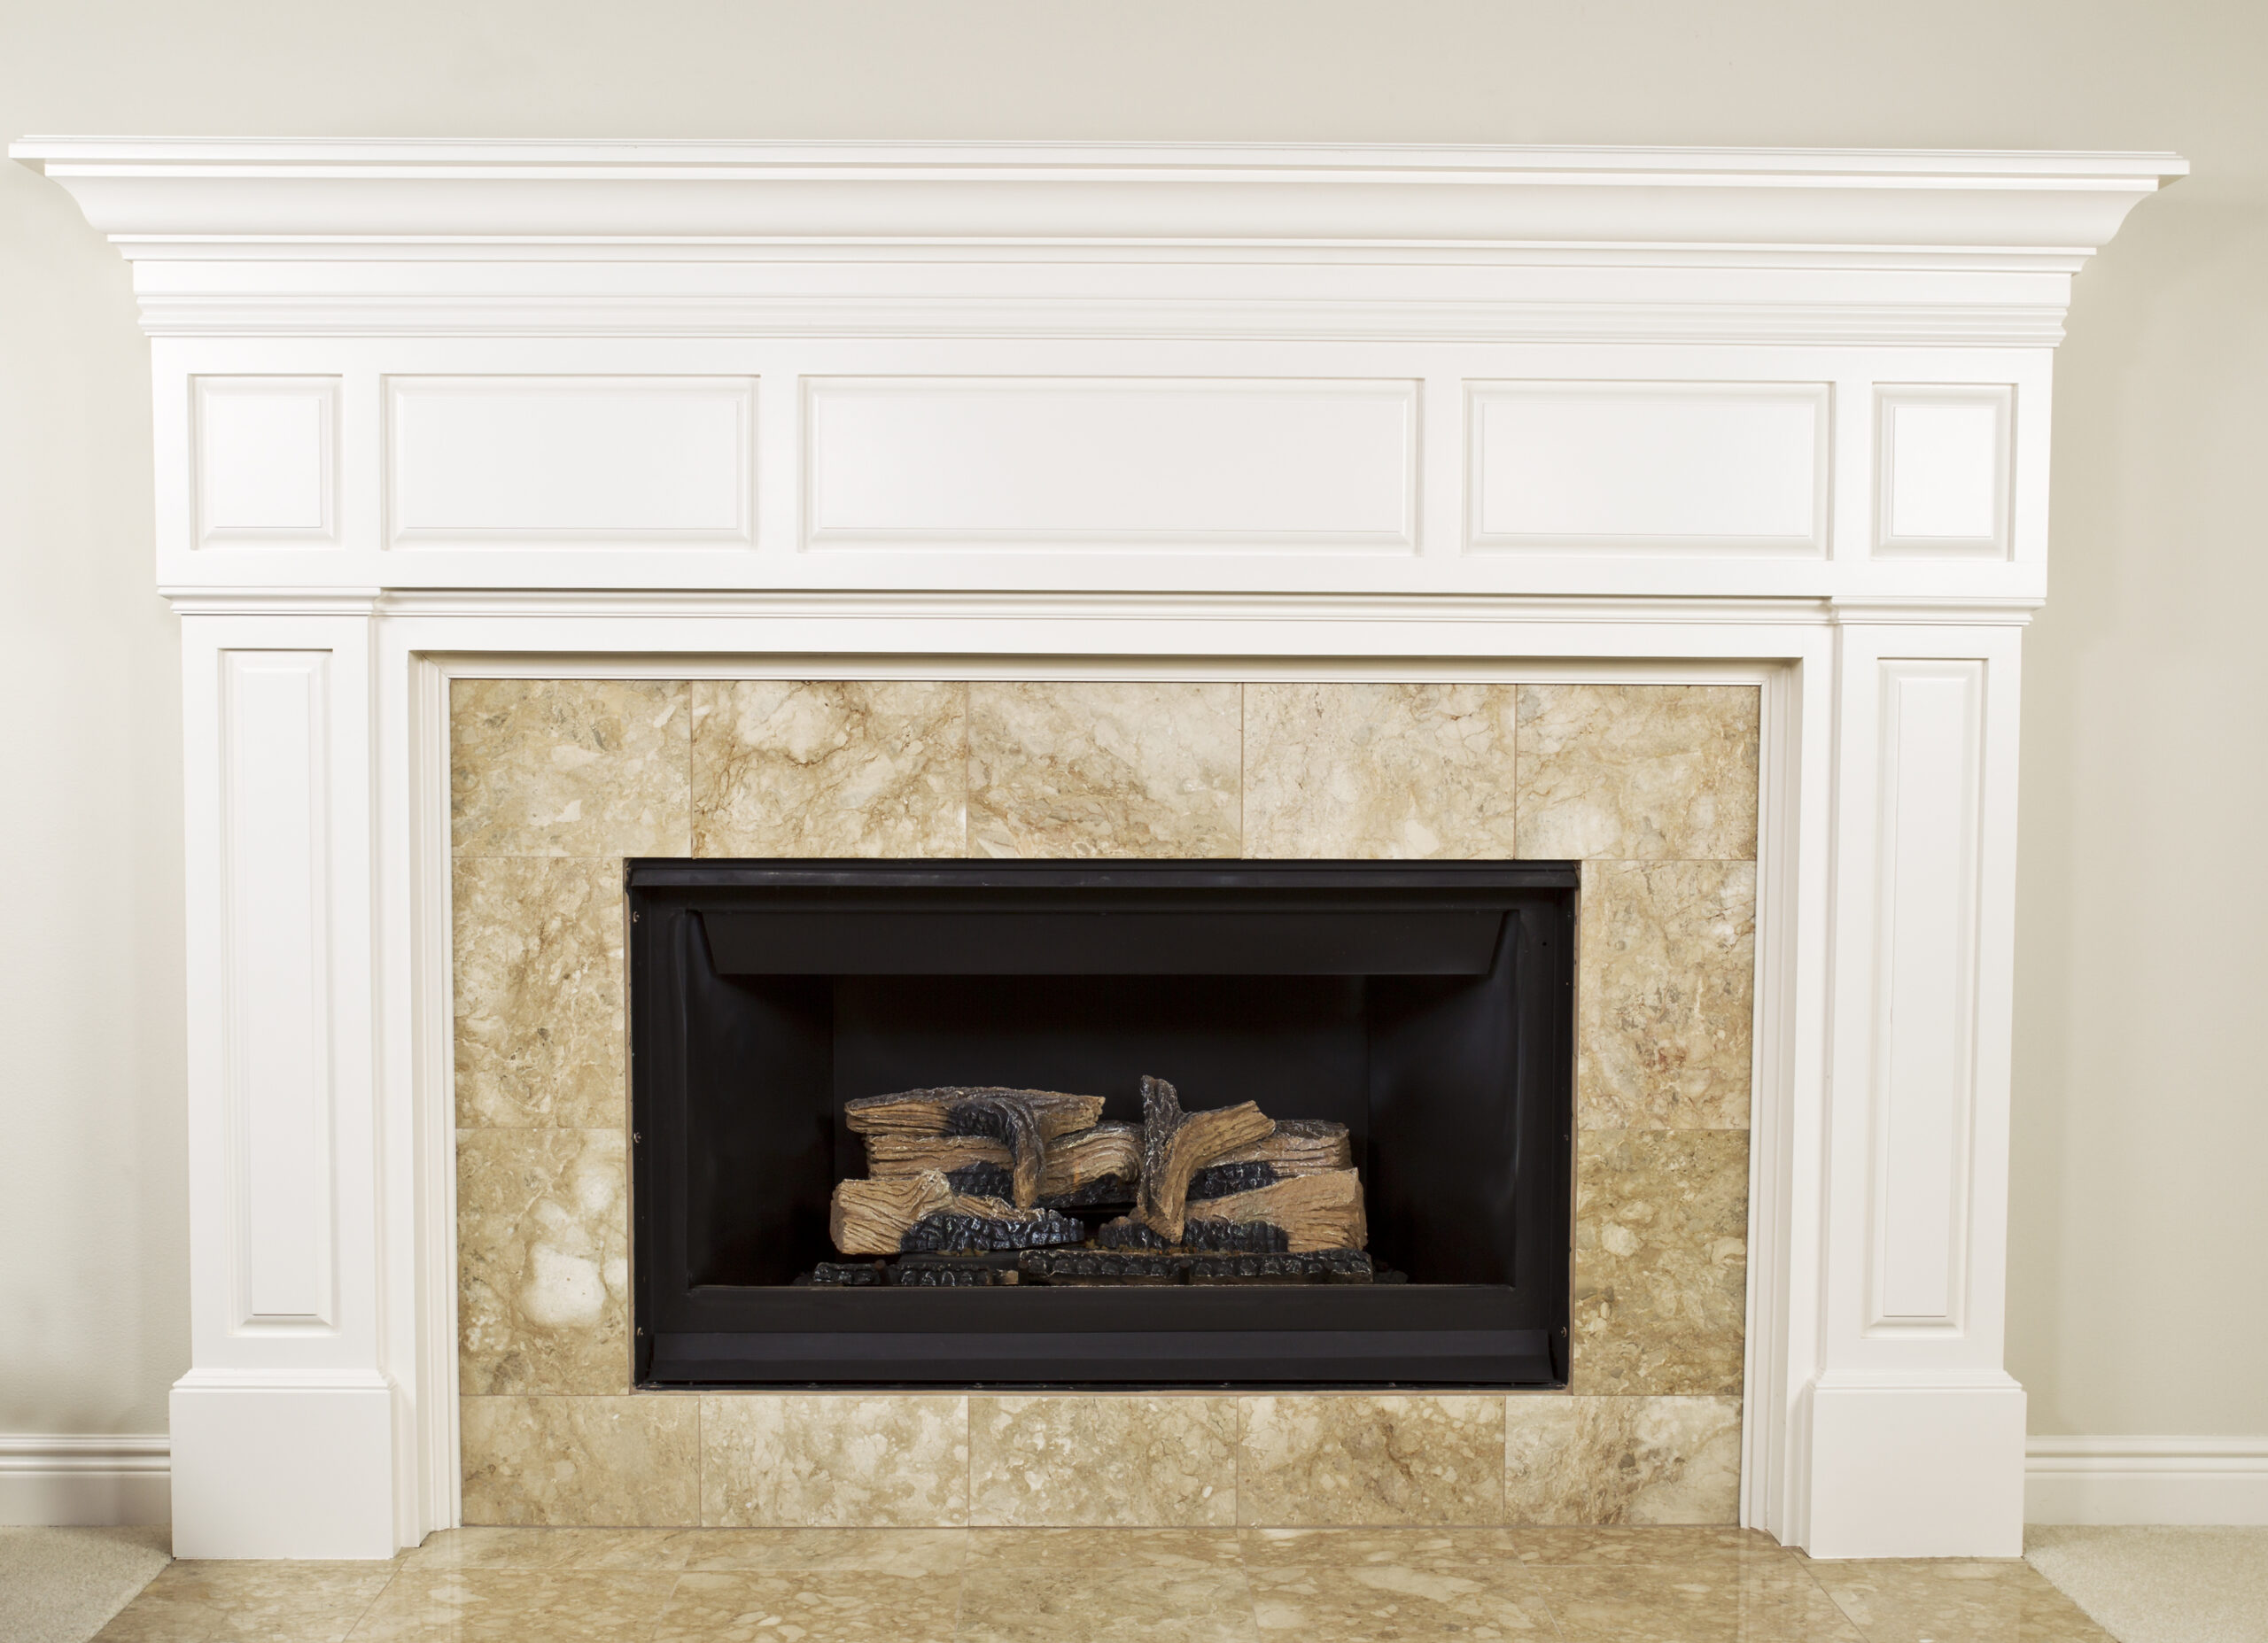 DIY Fireplace Mantel: A Step-by-Step Guide to Building Your Own